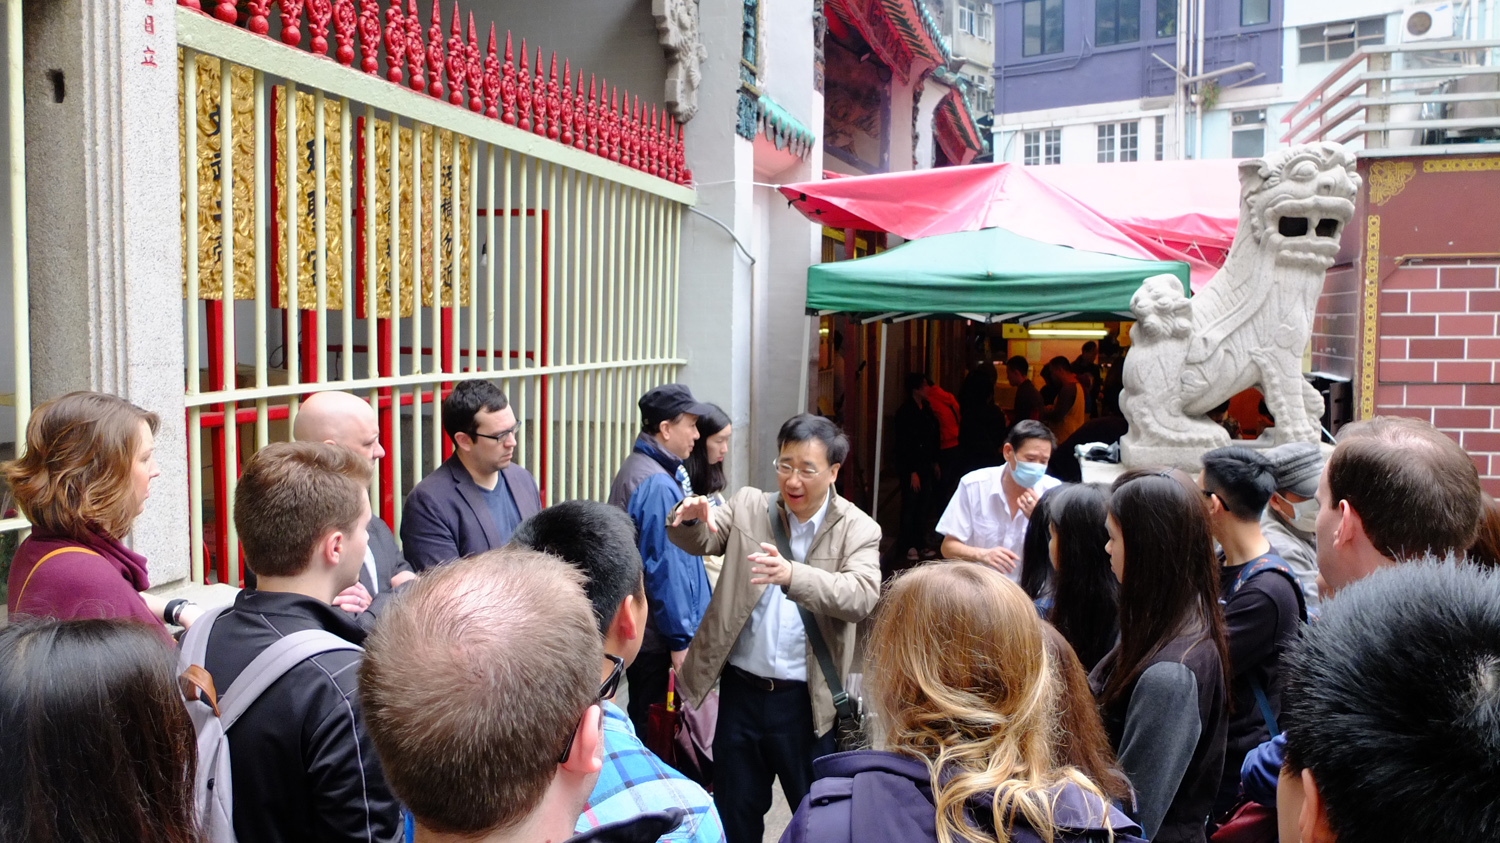 CIE Lecturers led students to tour around various famous places in the Central and Sheung Wan Districts.